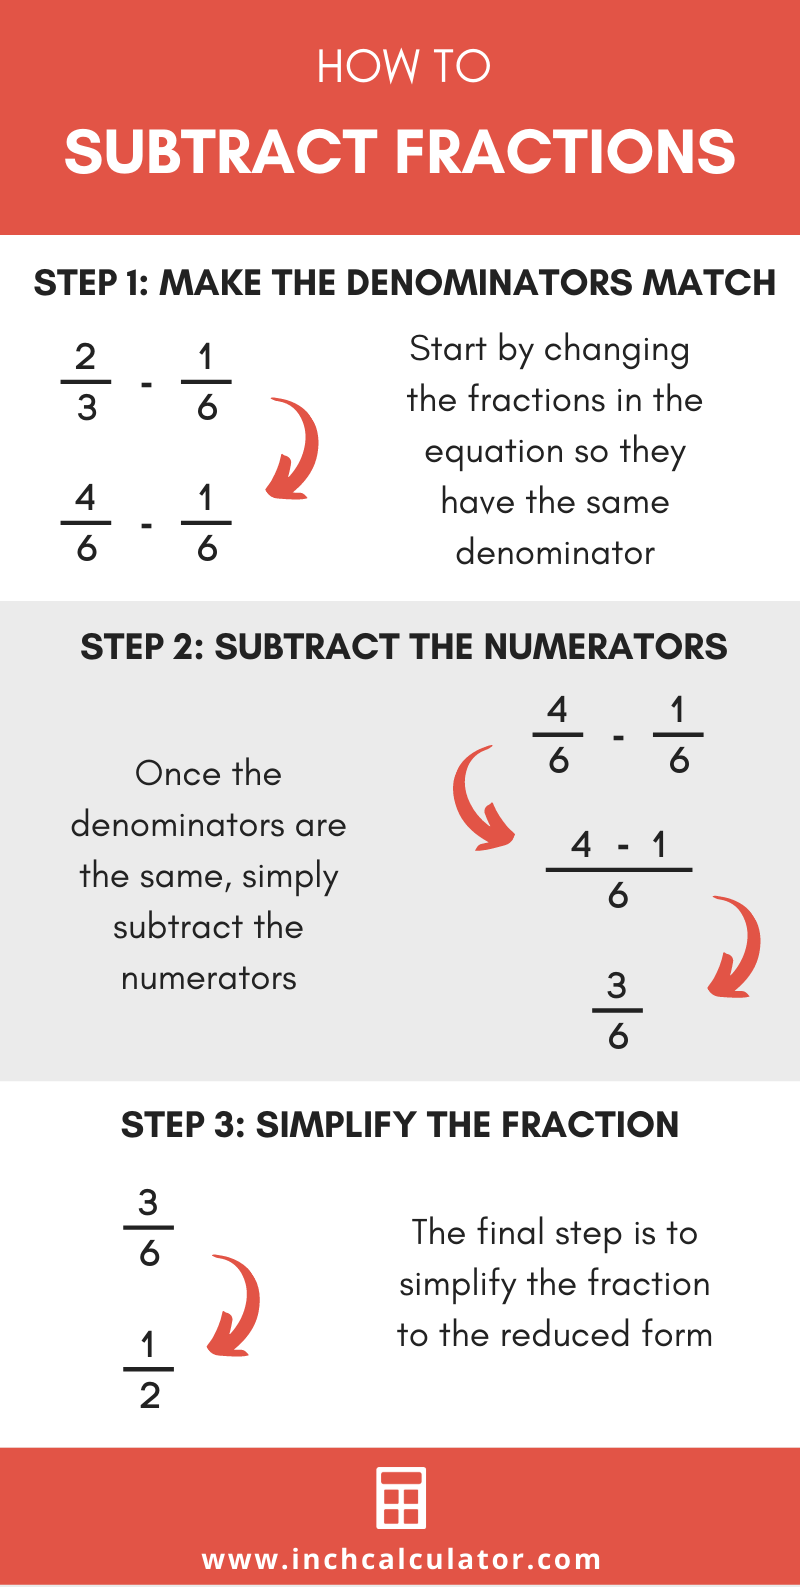 Illustration showing how to subtract two fractions step-by-step